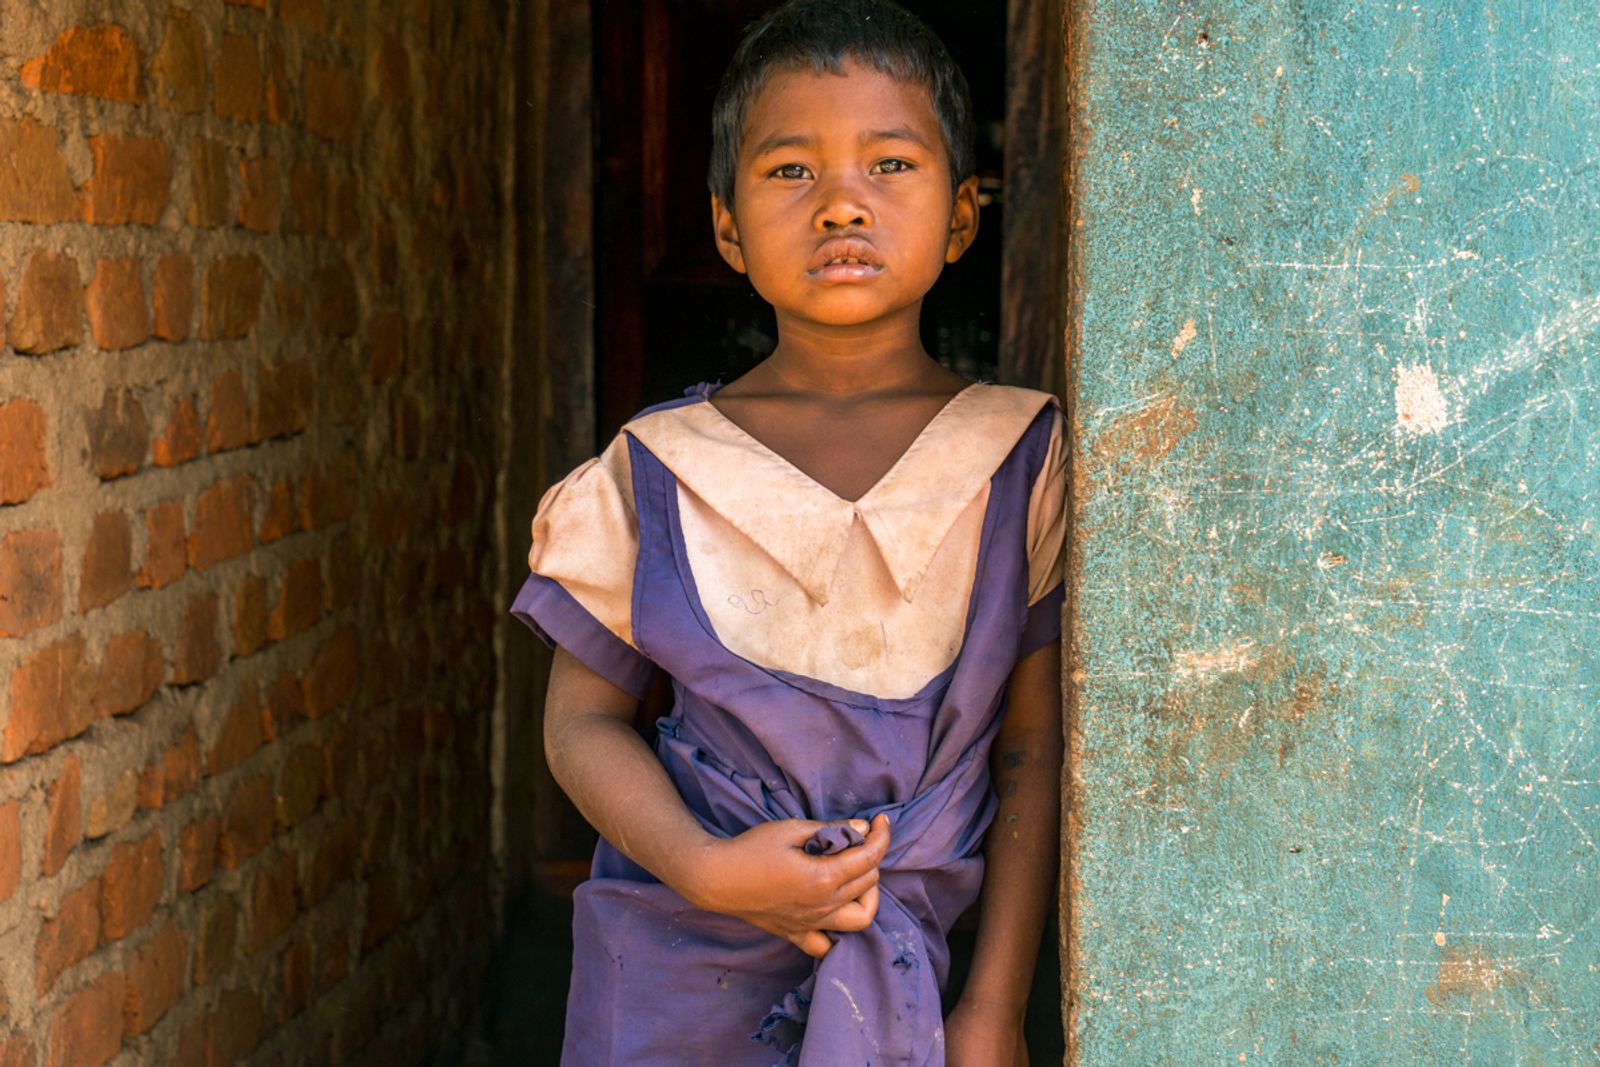 © Mary Catherine Messner - Image from the Tribal Odisha photography project